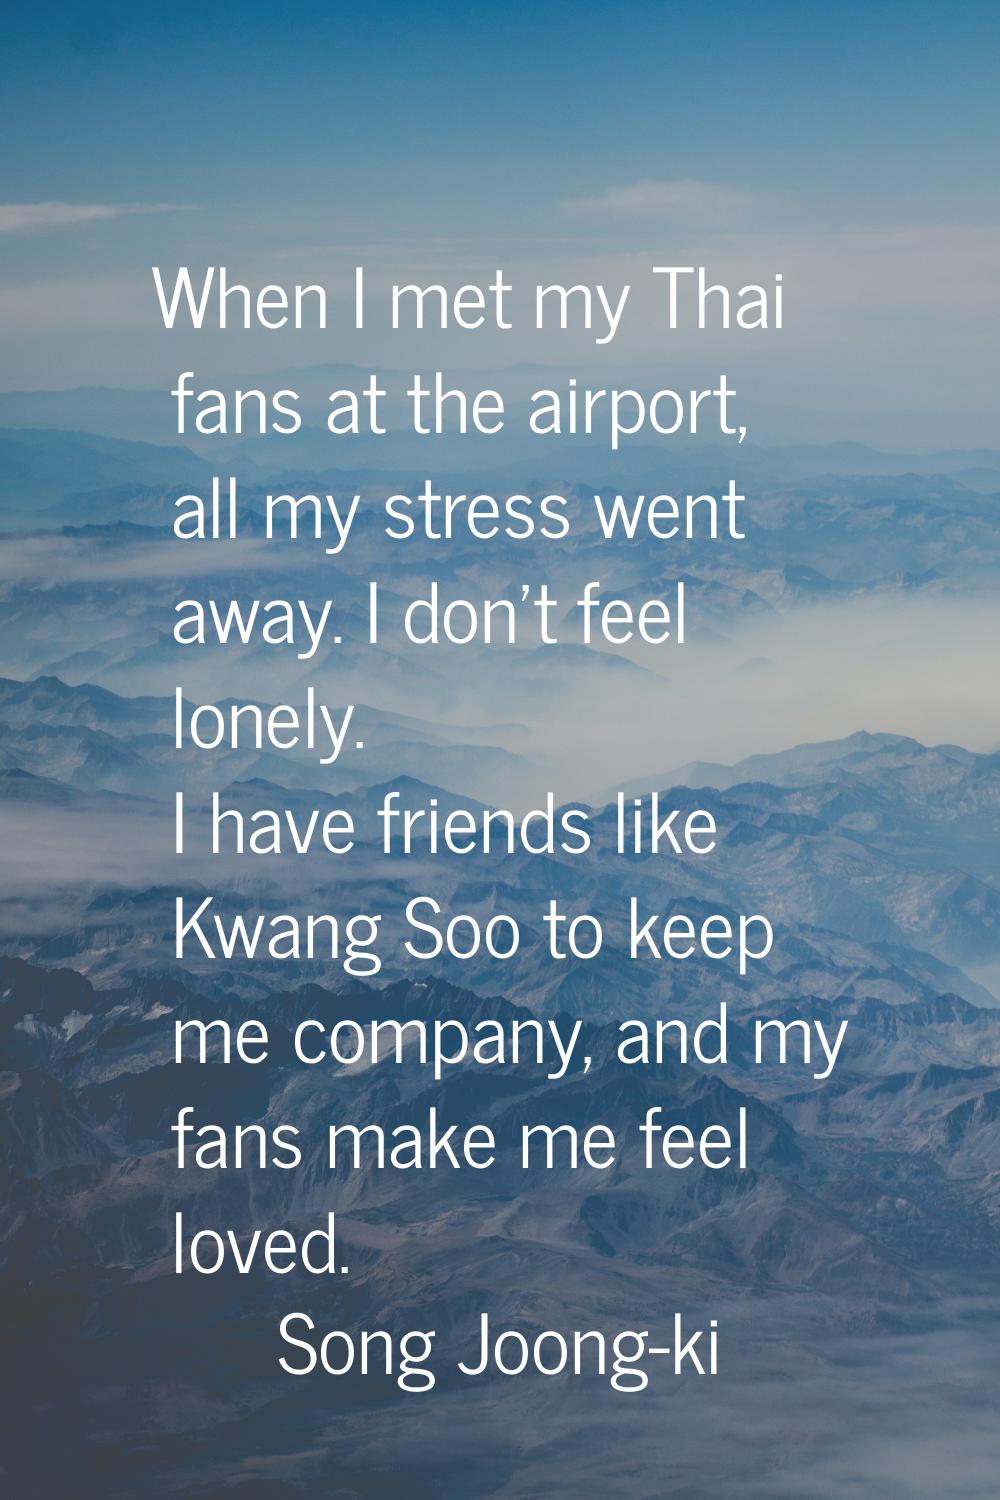 When I met my Thai fans at the airport, all my stress went away. I don't feel lonely. I have friend